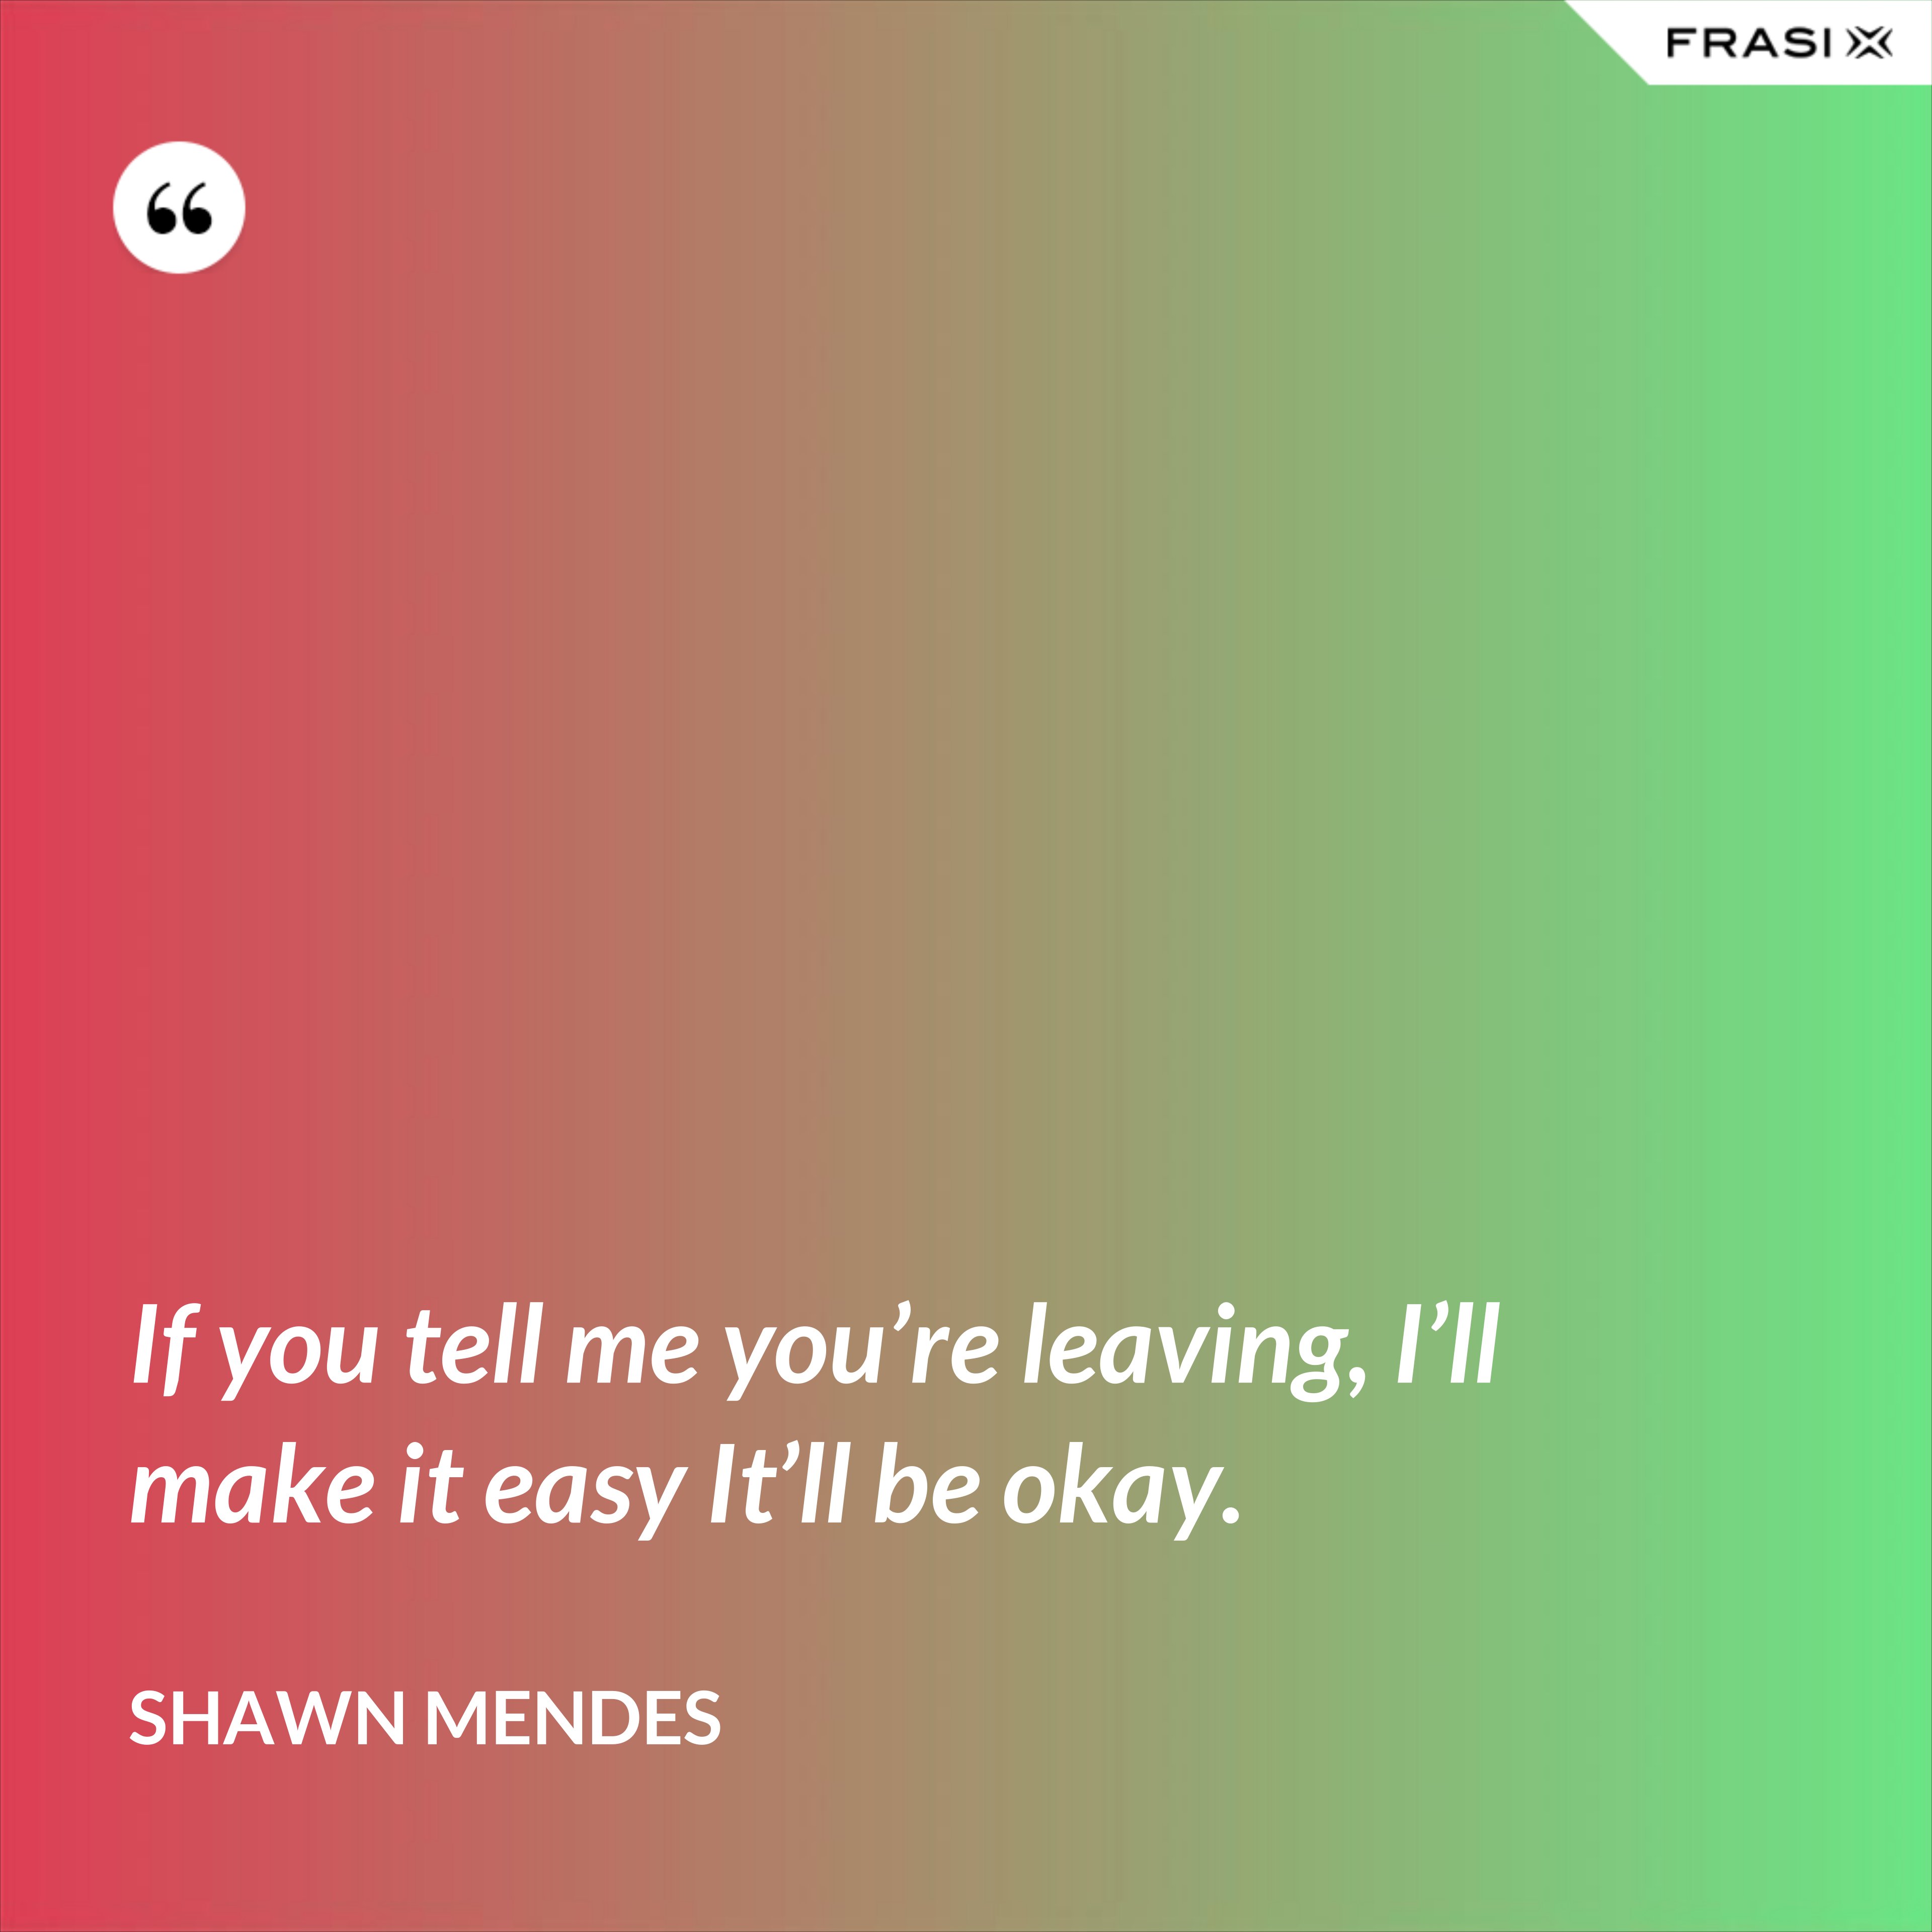 If you tell me you’re leaving, I’ll make it easy It’ll be okay. - Shawn Mendes